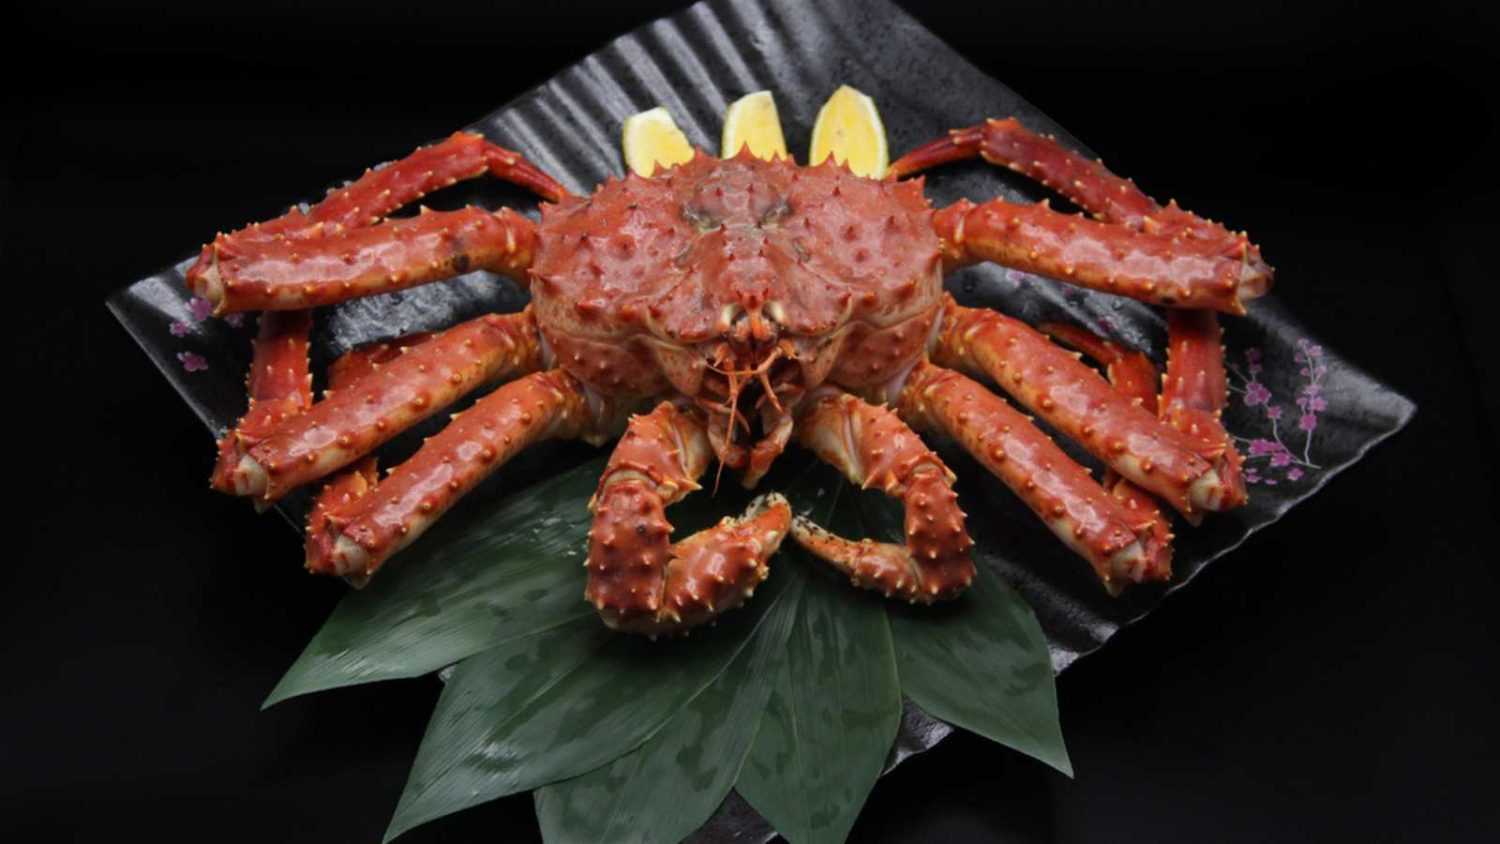 Steamed Alaskan king crab. ready to eat